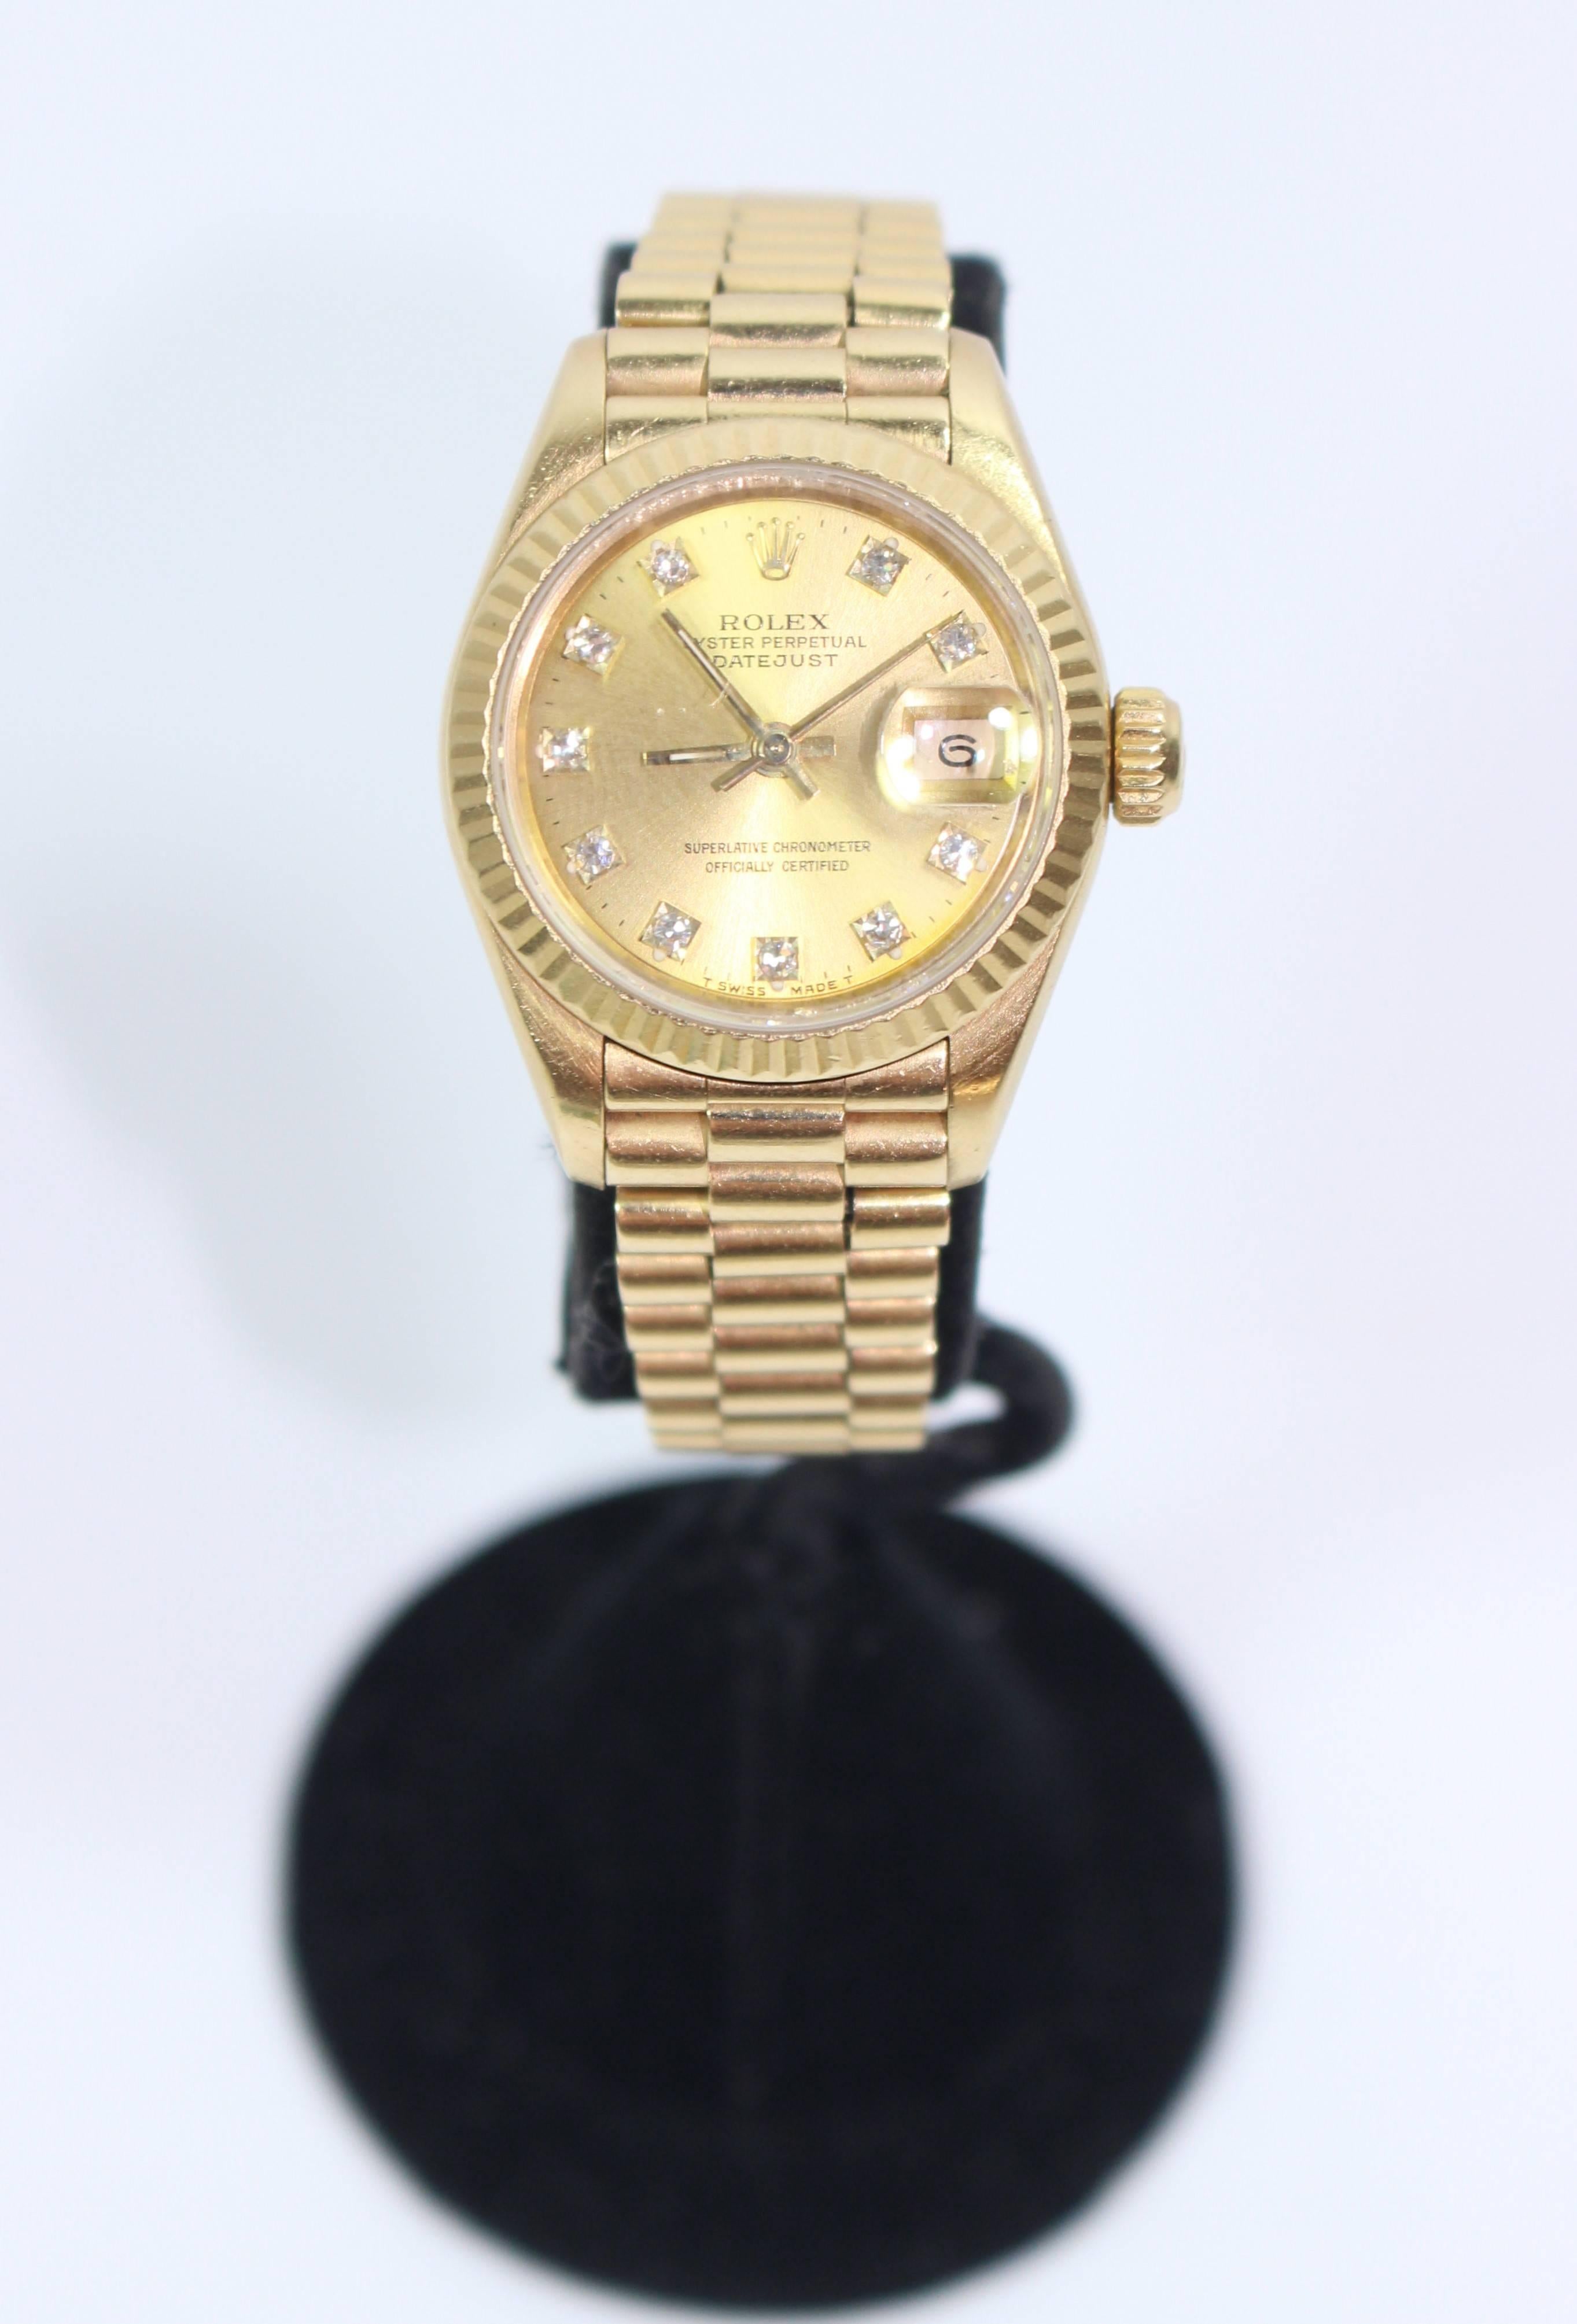 This fabulous Rolex  watch presented by The Paper Bag Princess of Beverly Hills features; Automatic winding, 29 jewels, Quickset date, sapphire crystal. 18k yellow gold case with fluted bezel (26mm diameter). Champagne dial with factory diamond hour